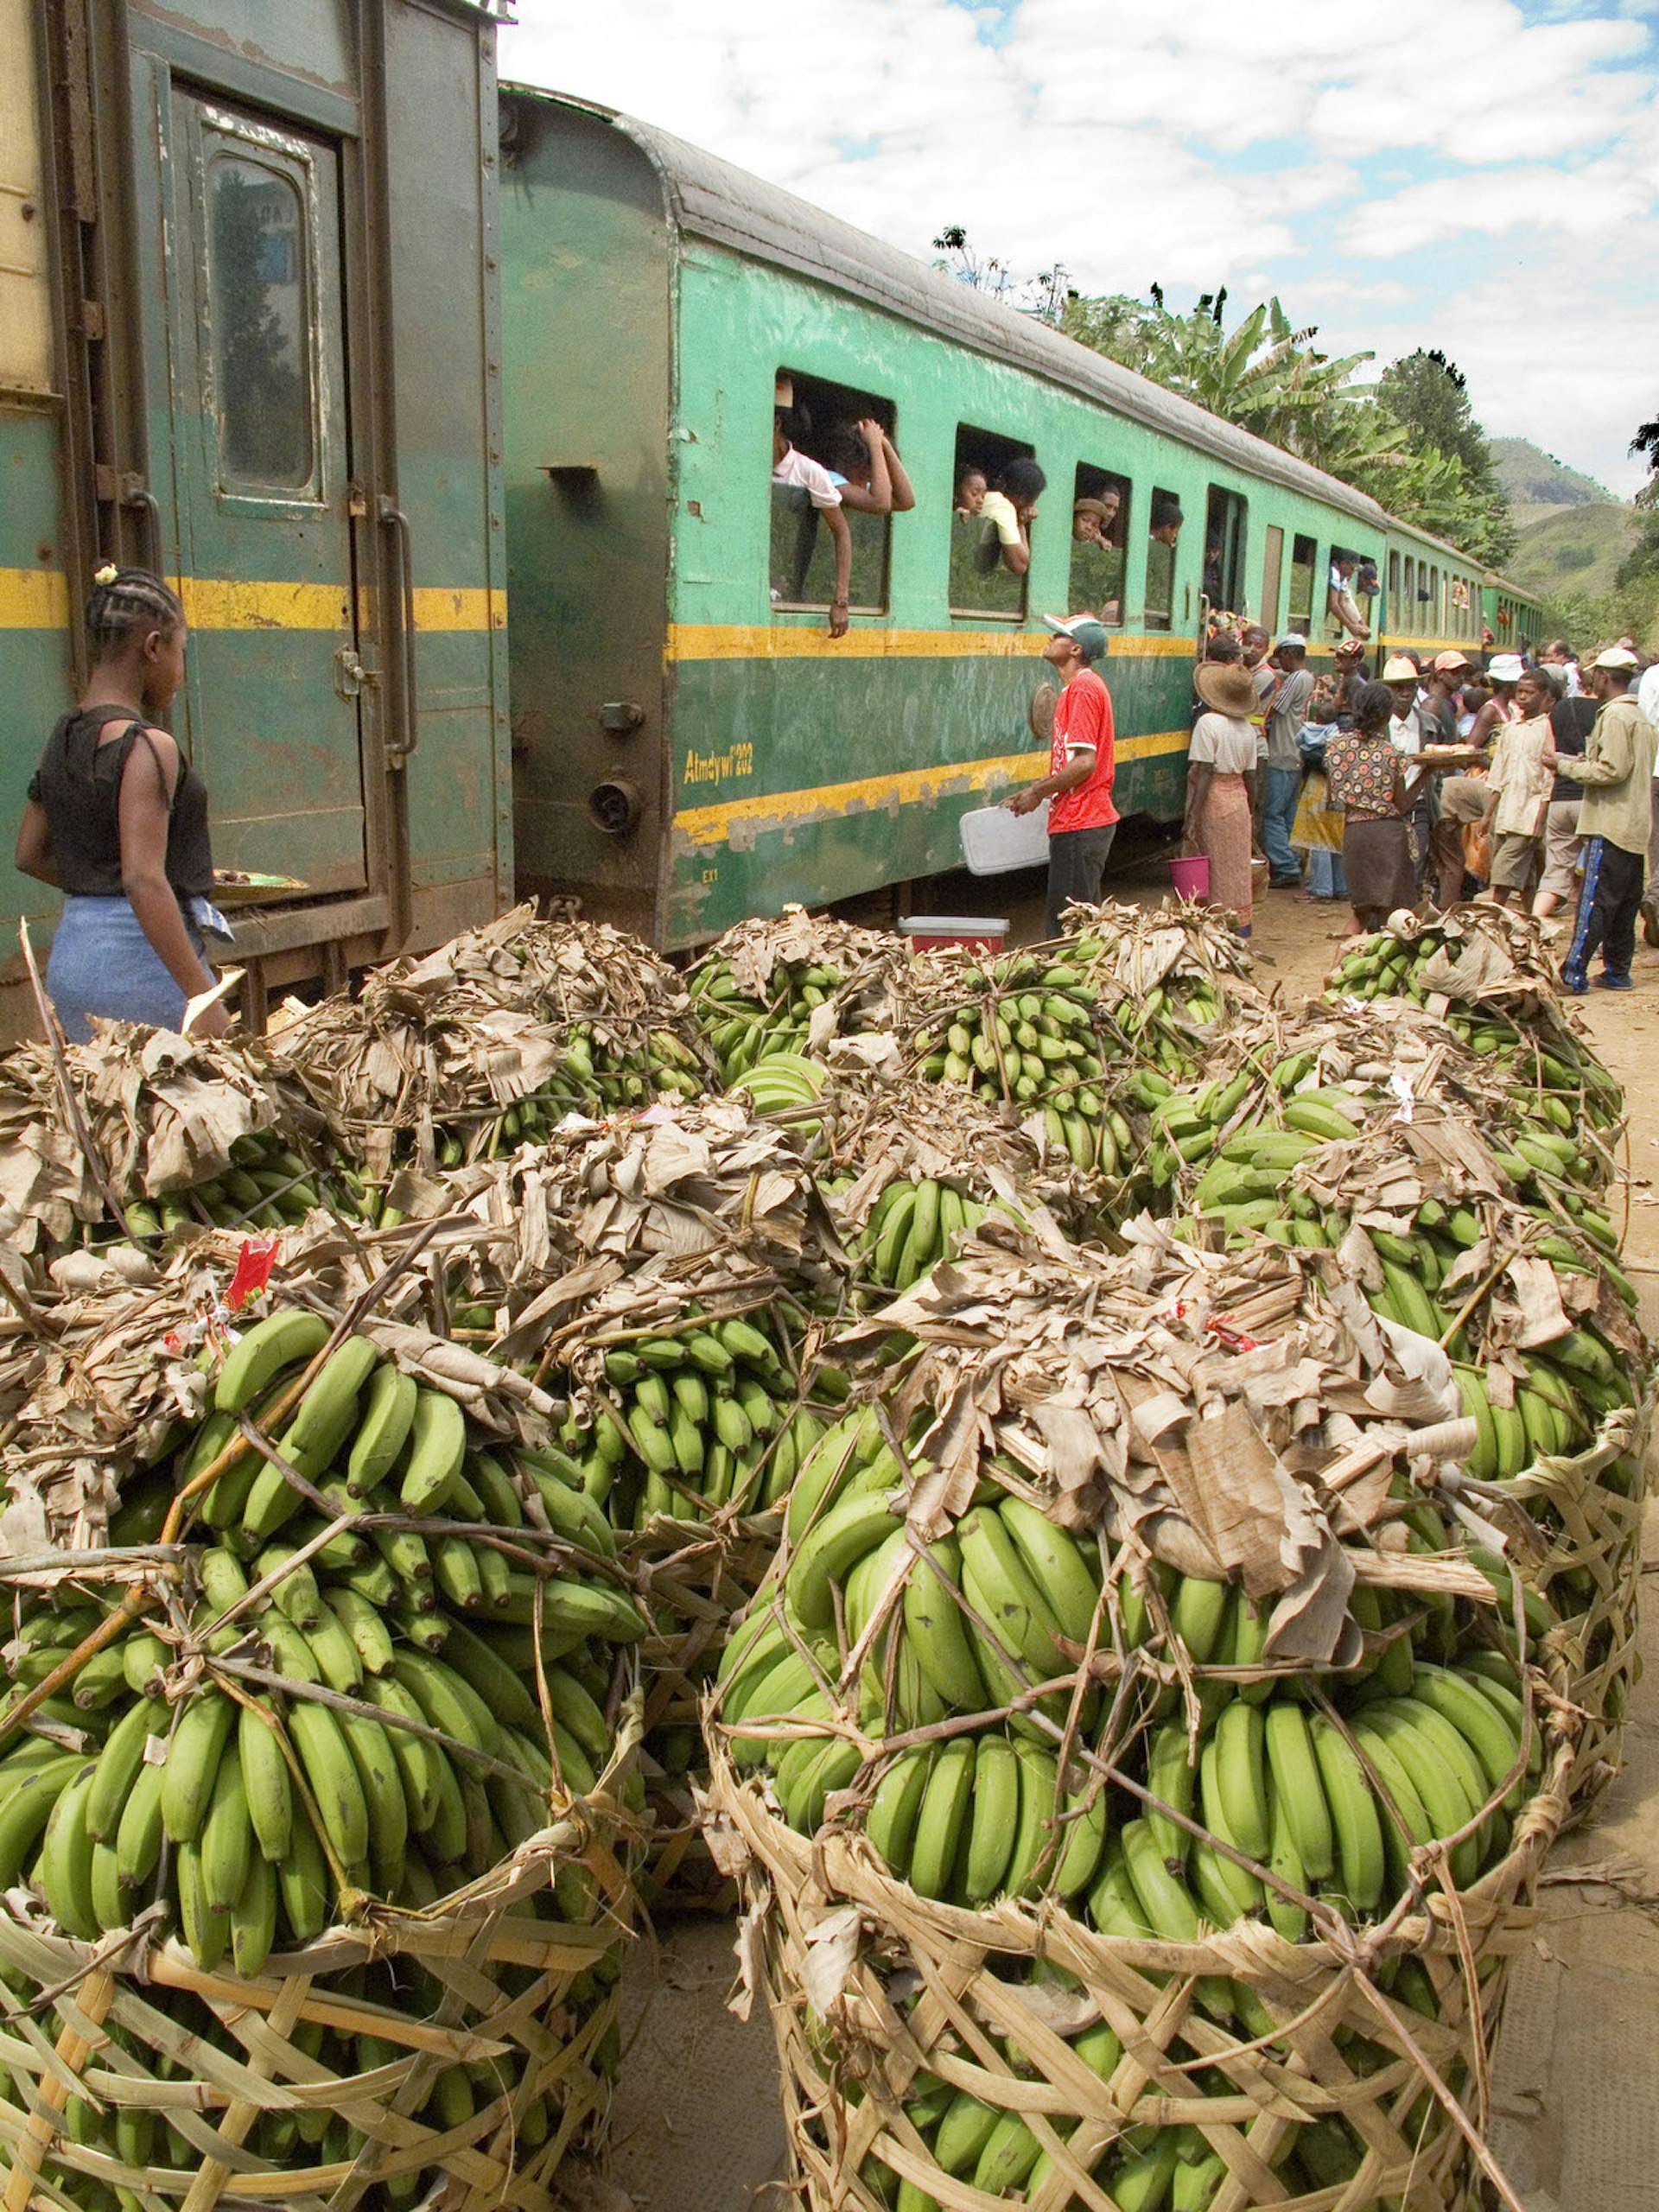 At each of the 18 stops an incalculable amount of freight is loaded and unloaded by Malagasy passengers © Andia / UIG / Getty Images